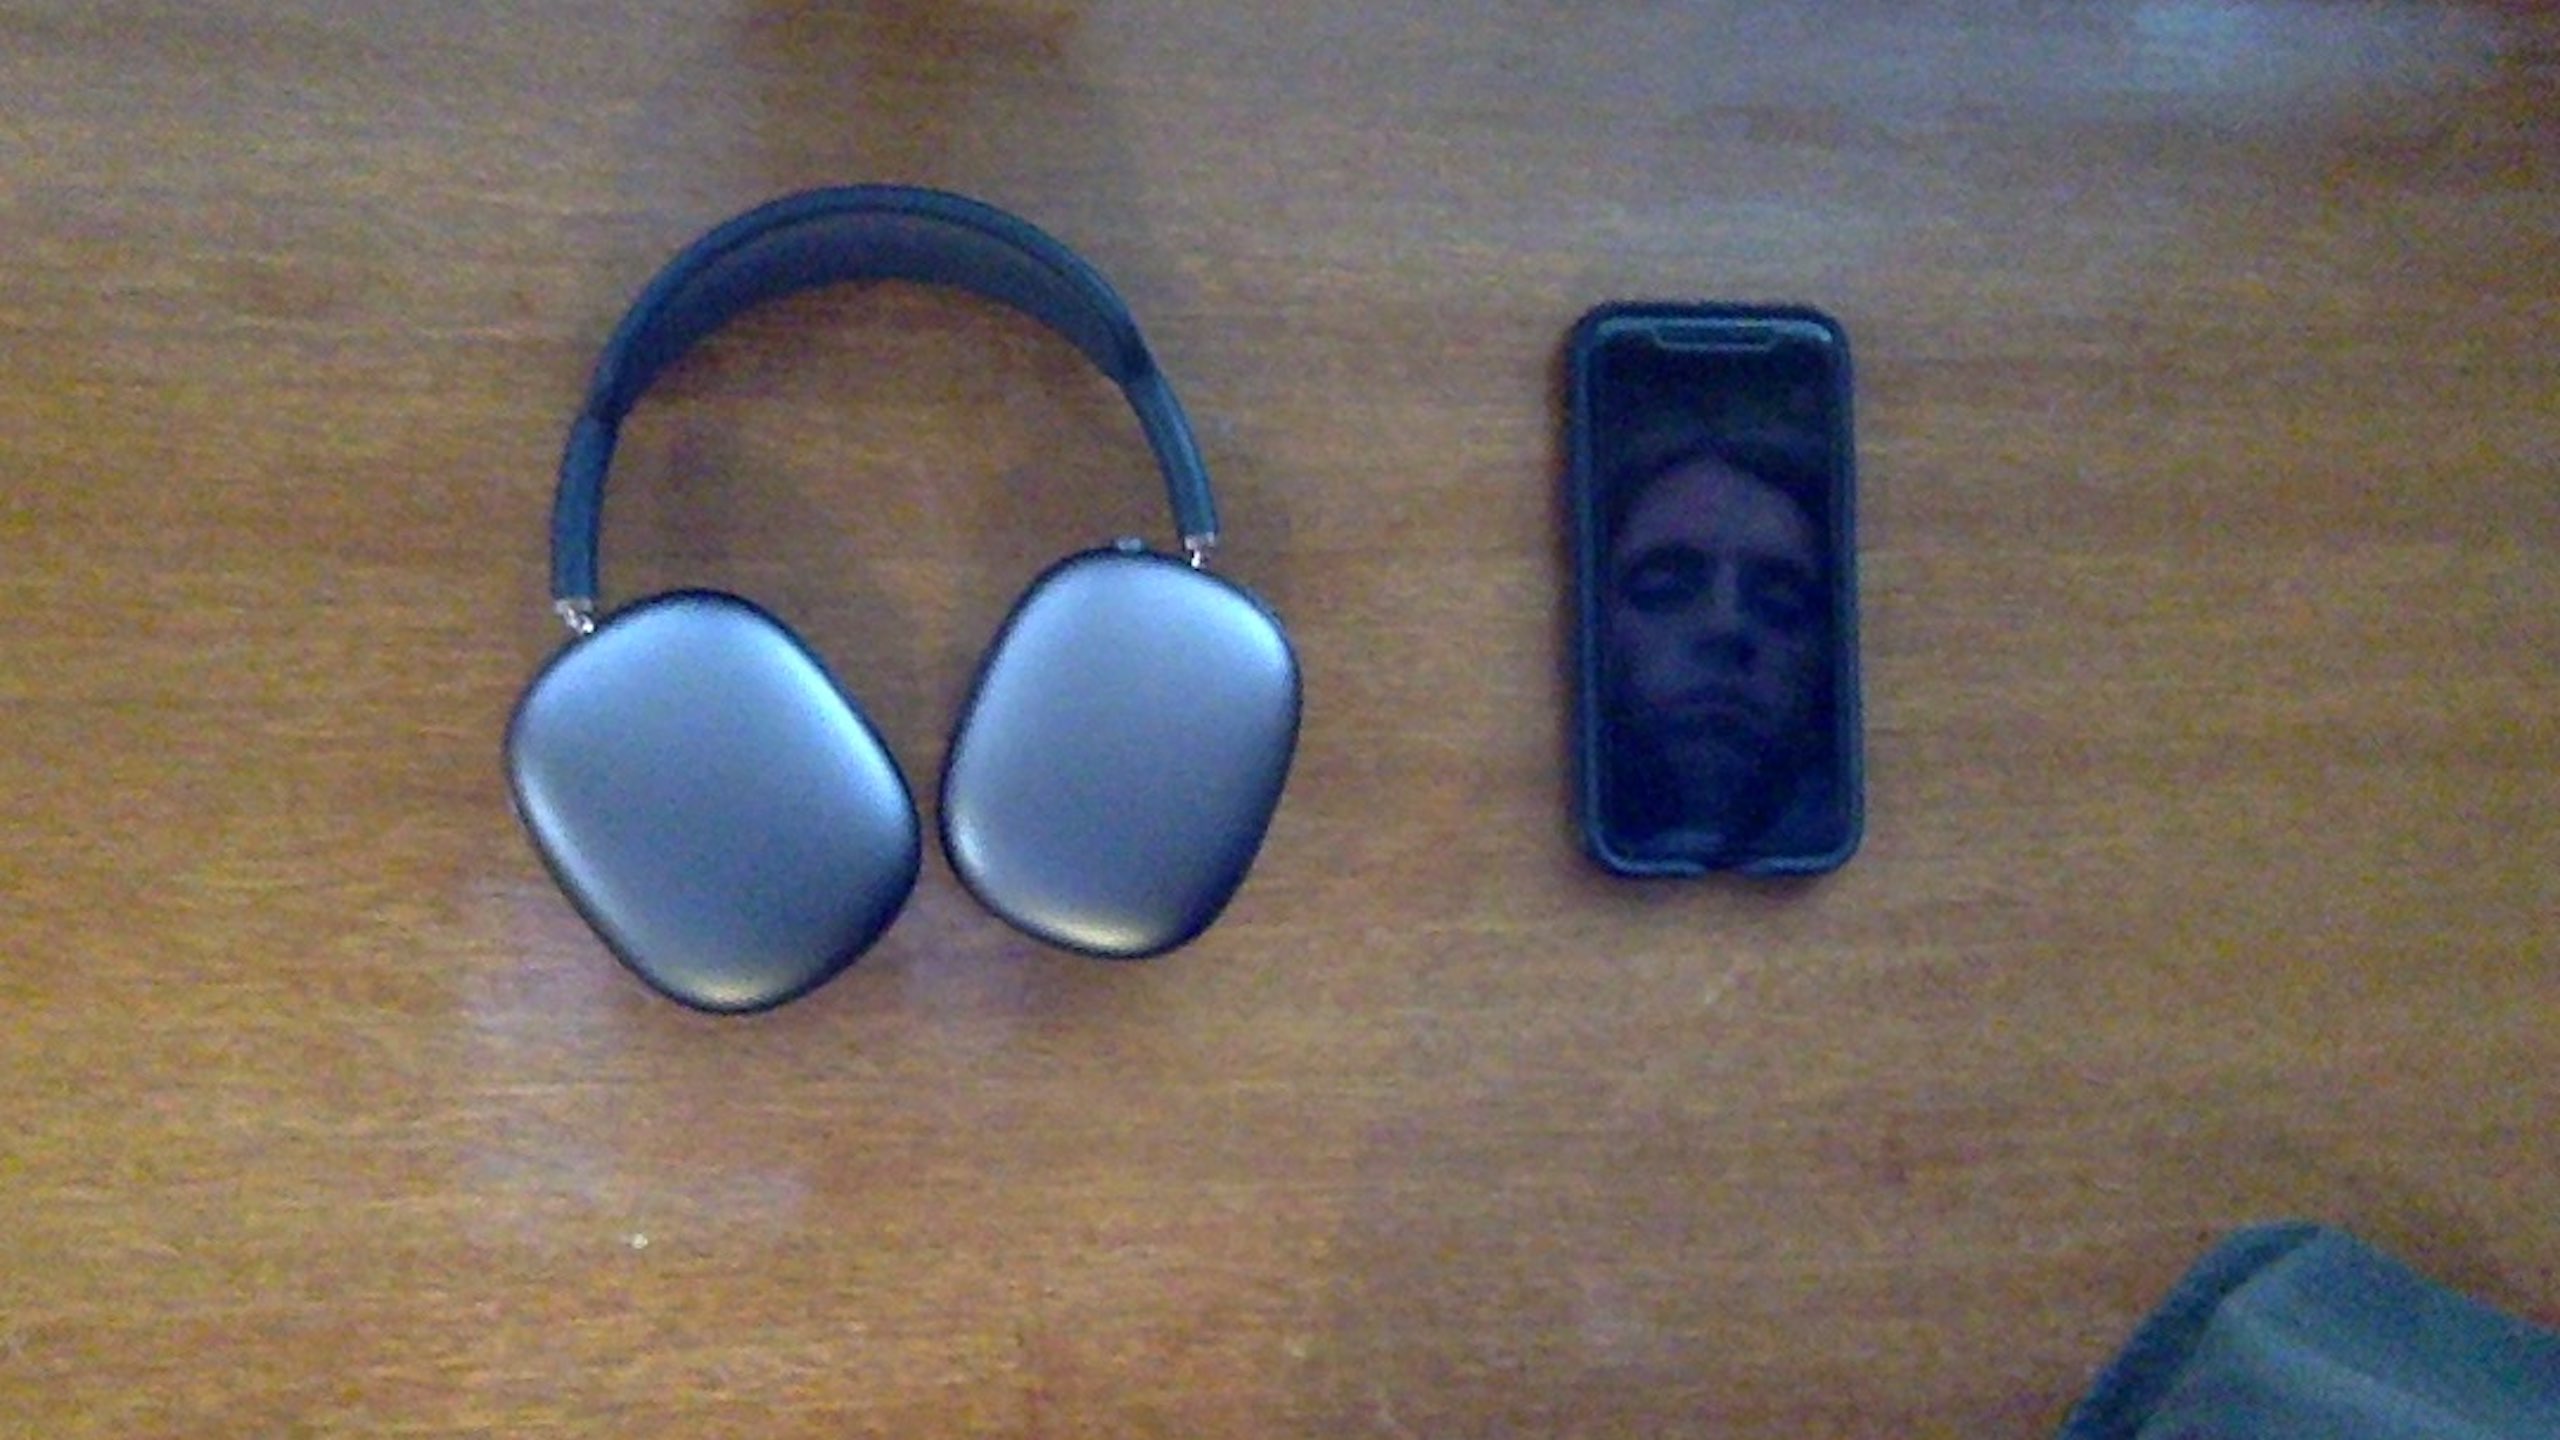 iPhone next to AirPods Max